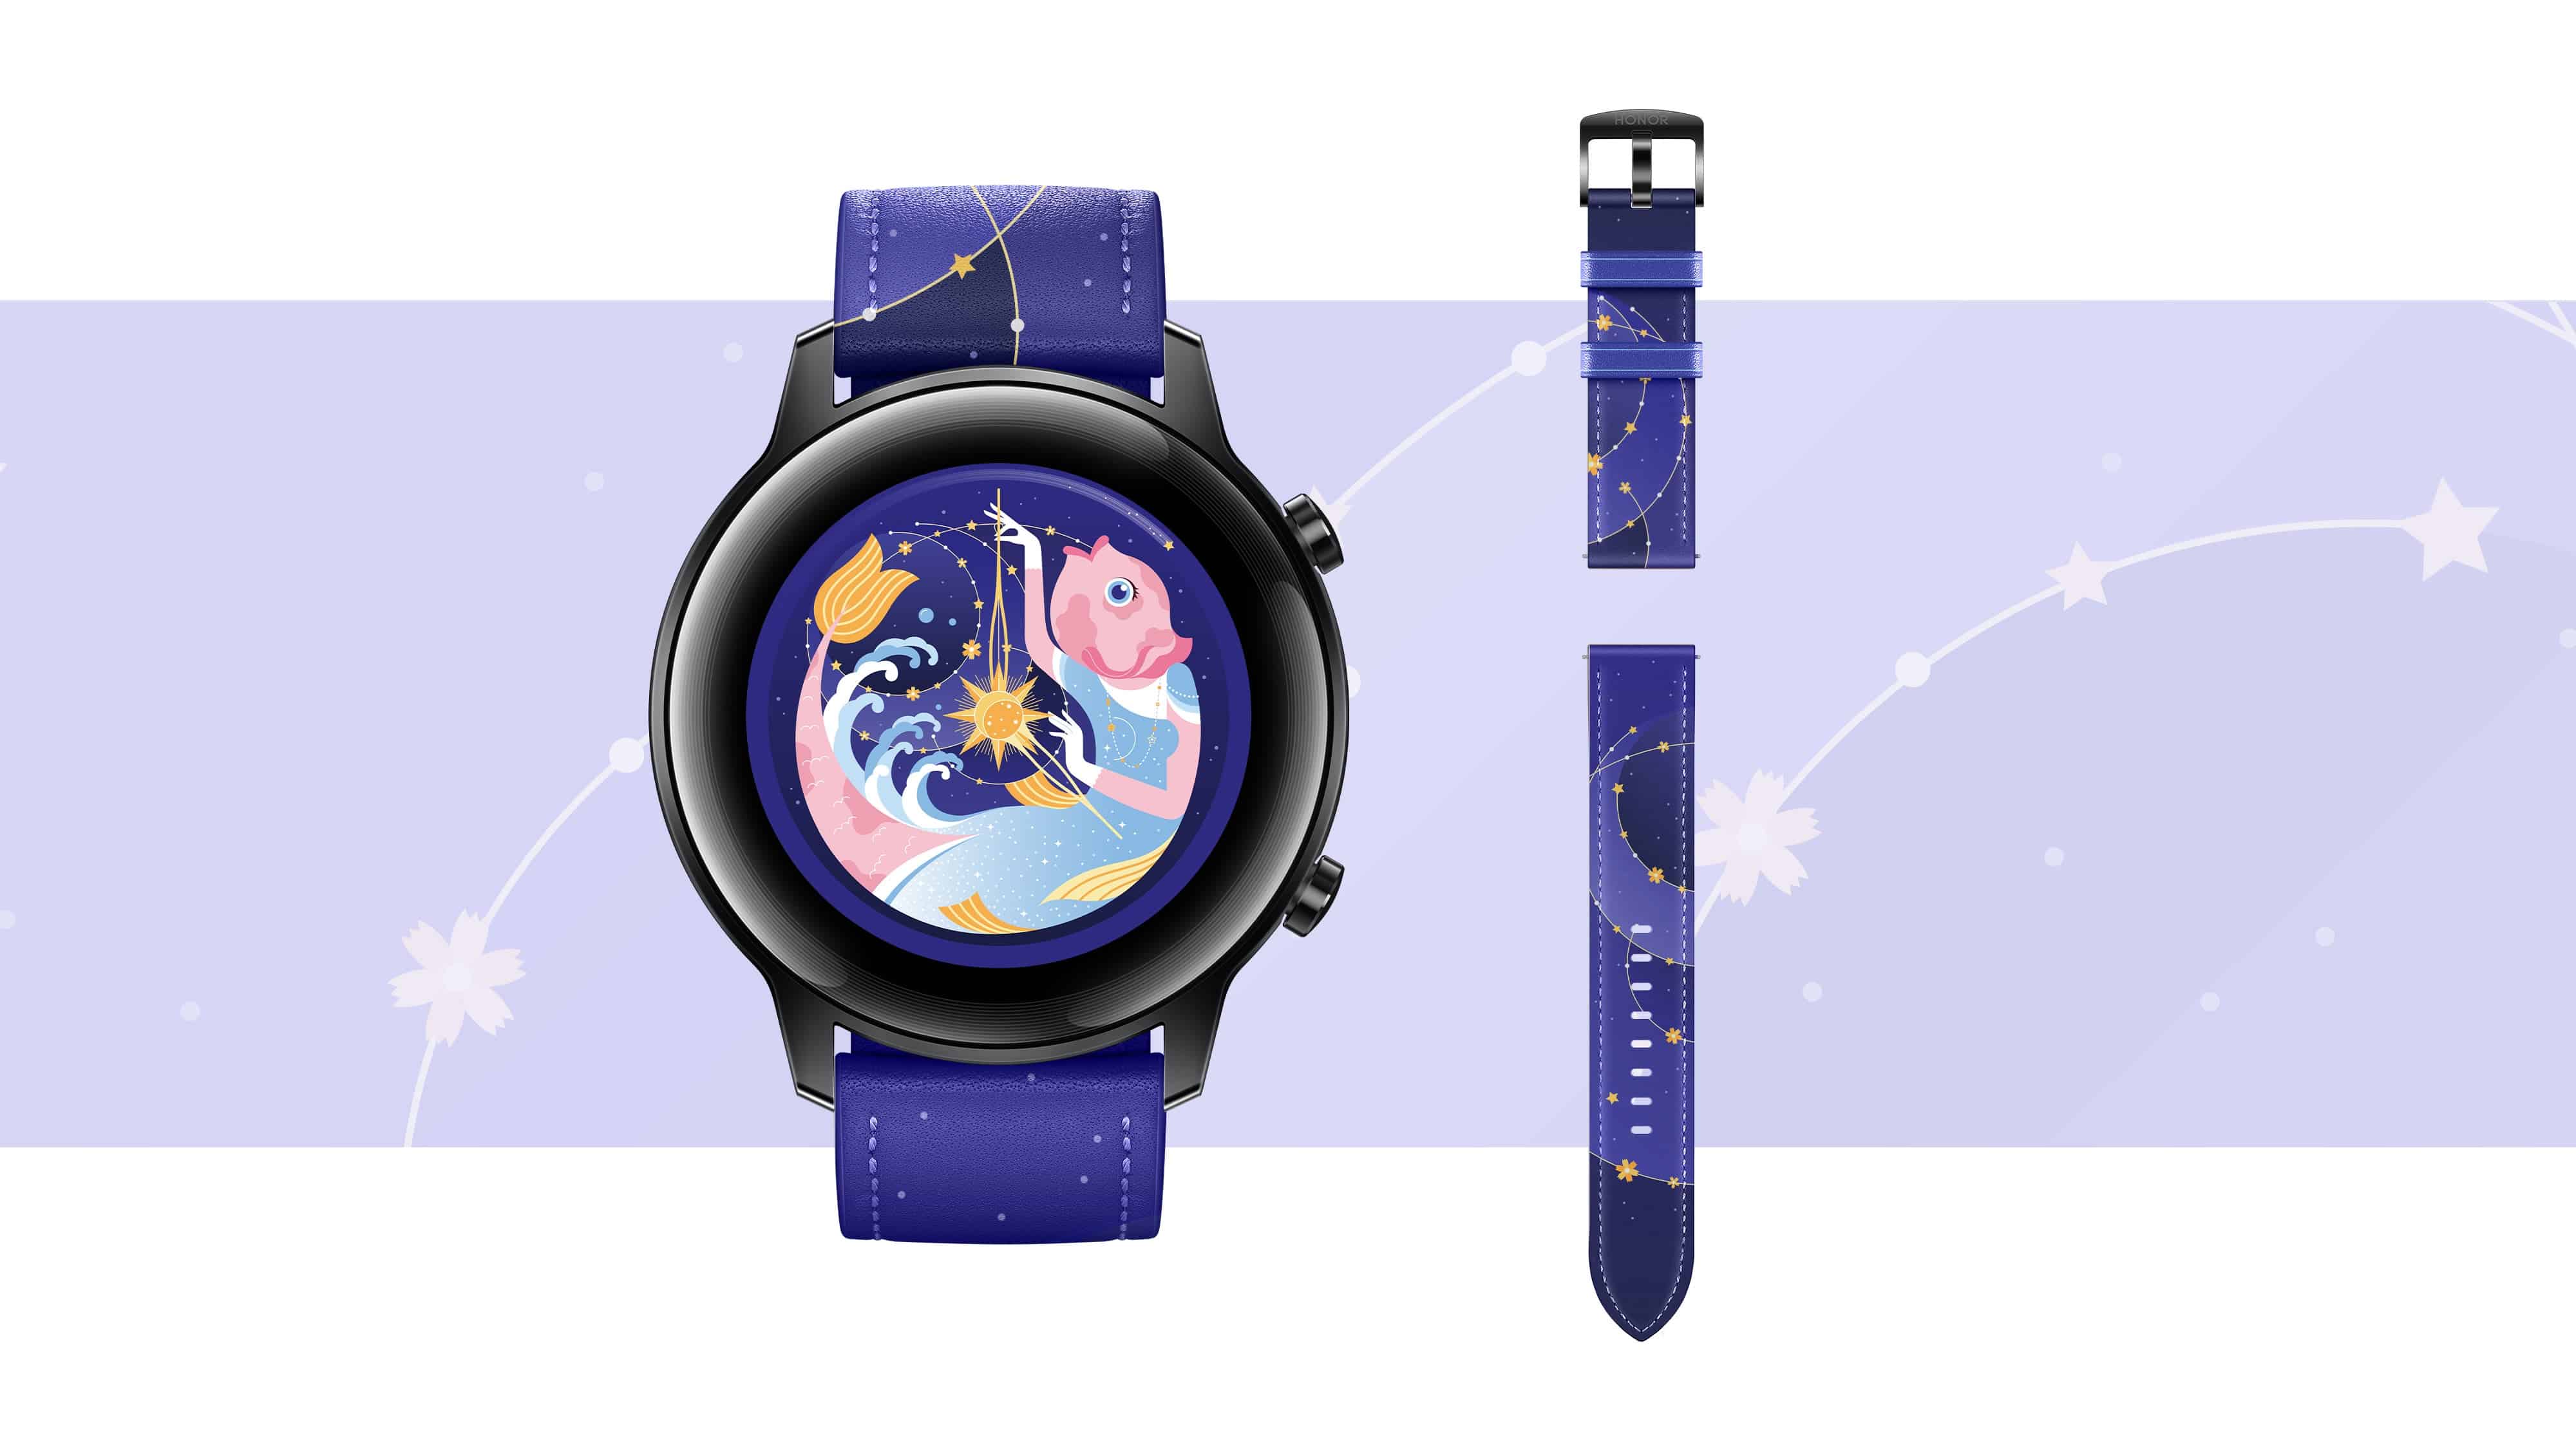 Honor MagicWatch 2 limited edition official